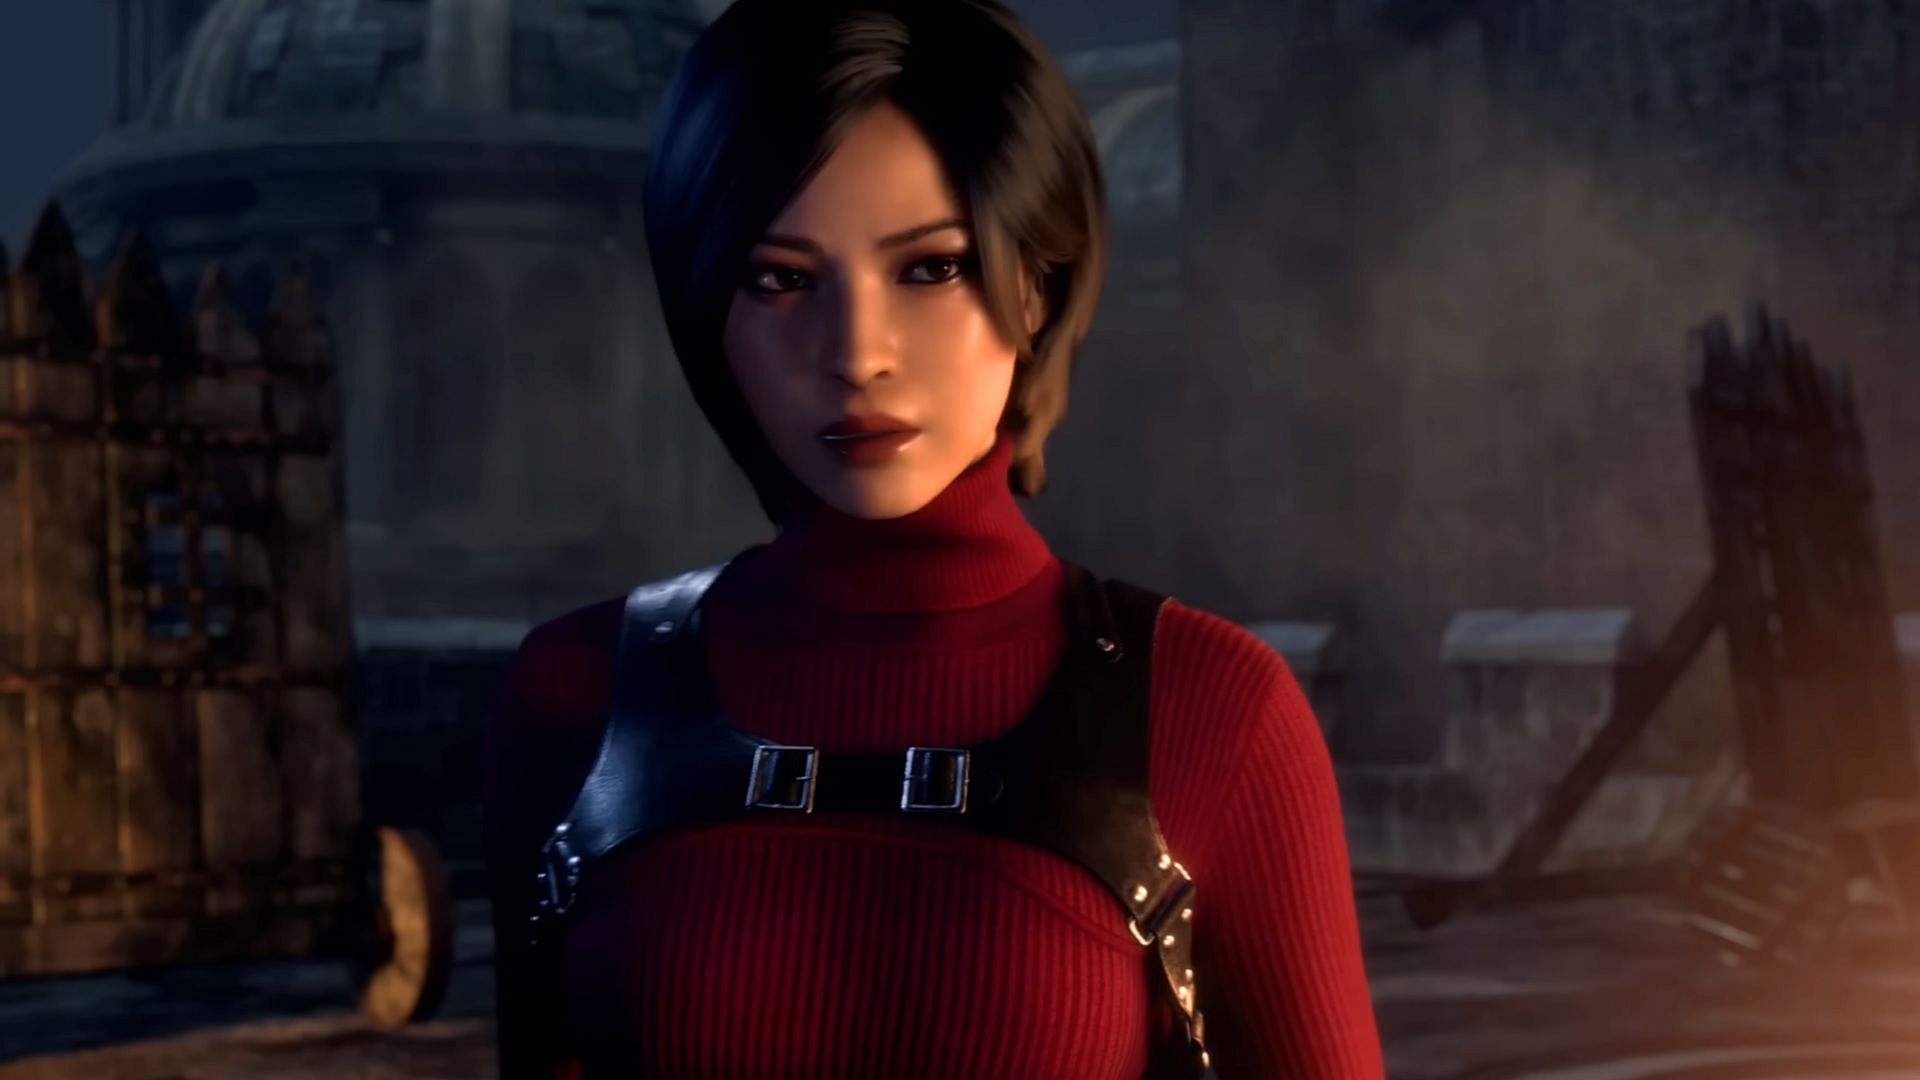 A Resident Evil prequel movie featuring Ada Wong is rumored to release next year based on the events of a classic Capcom title